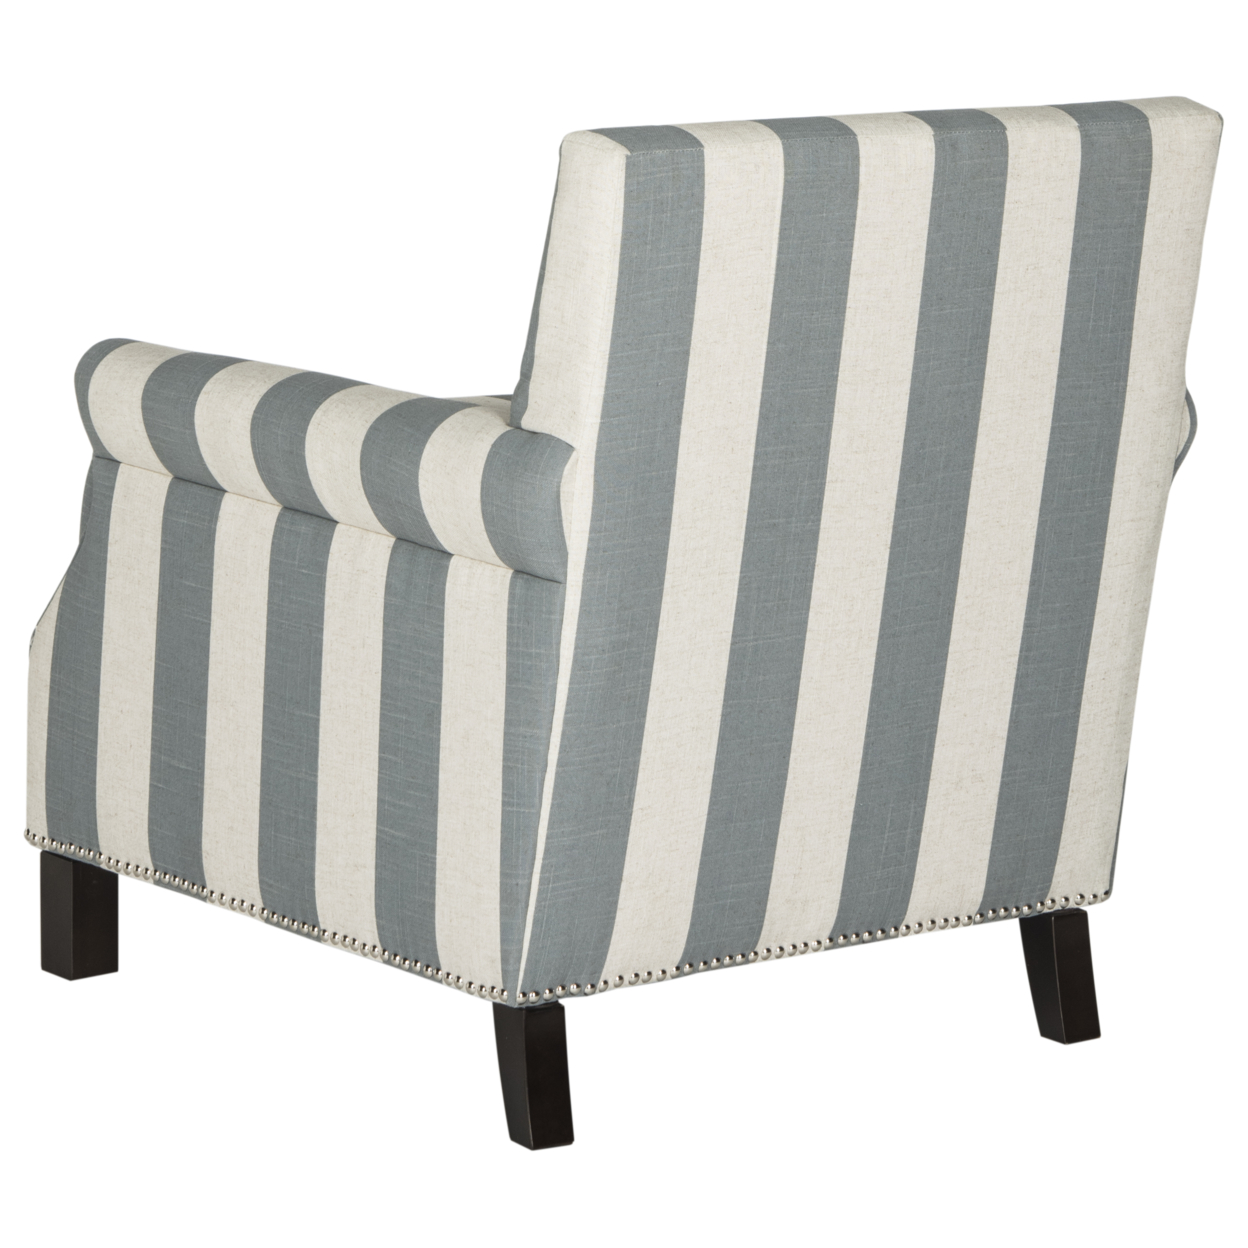 SAFAVIEH Easton Rustic Glam Upholstered Club Chair w/ Nailheads, Grey/White - image 5 of 5